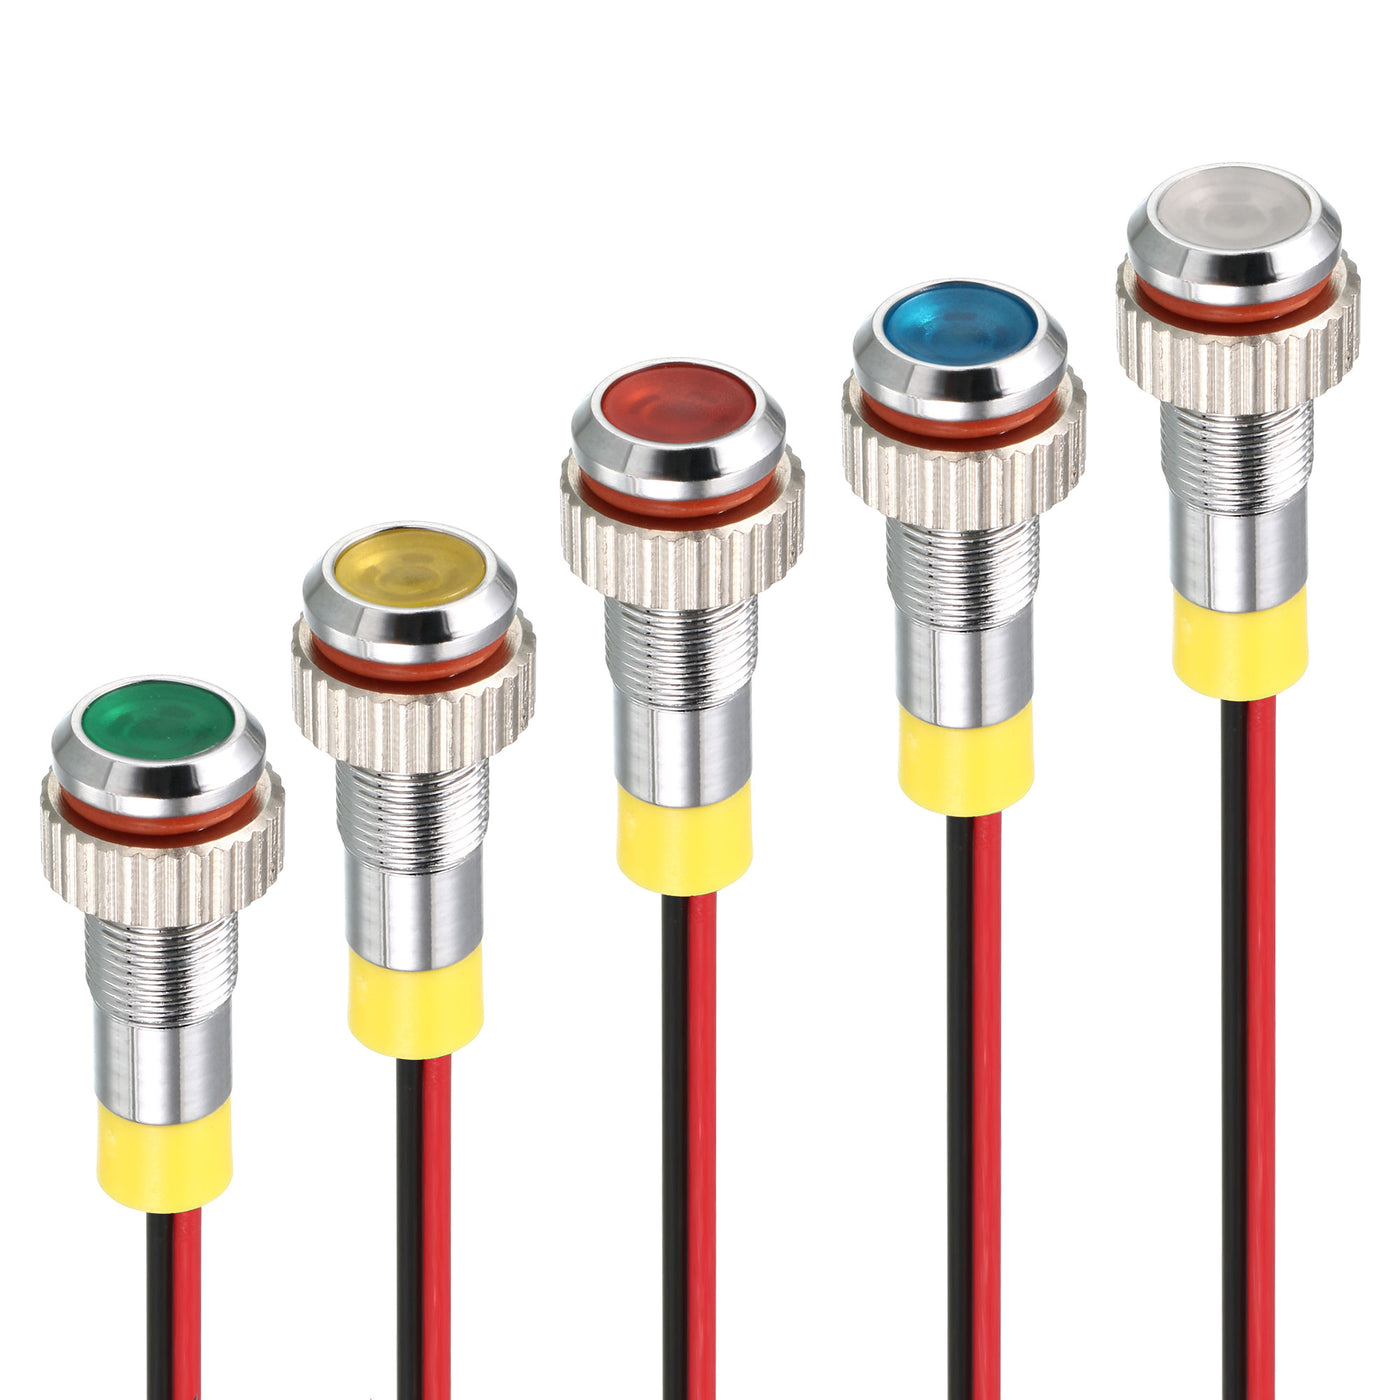 uxcell Uxcell Signal Indicator Light AC/DC 12V 6mm Dash Lamp Flush Panel Mount Metal Shell White Red Yellow Blue Green 5Pcs